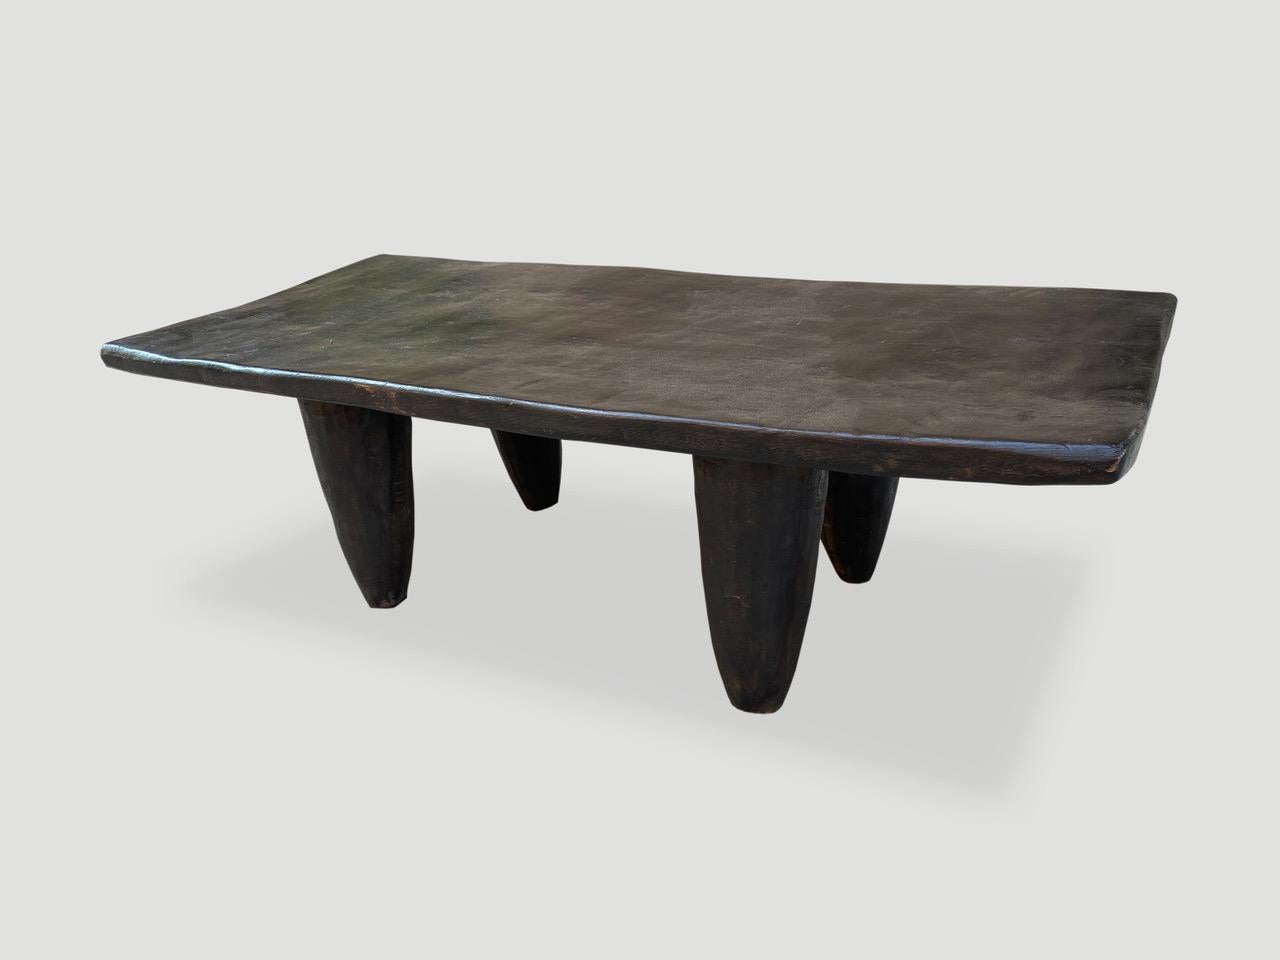 Antique bench or coffee table hand carved by the Senufo tribes from a single block of iroko wood, native to the west coast of Africa. The wood is tough, dense and very durable. Shown with cone style legs and stained espresso. We only source the